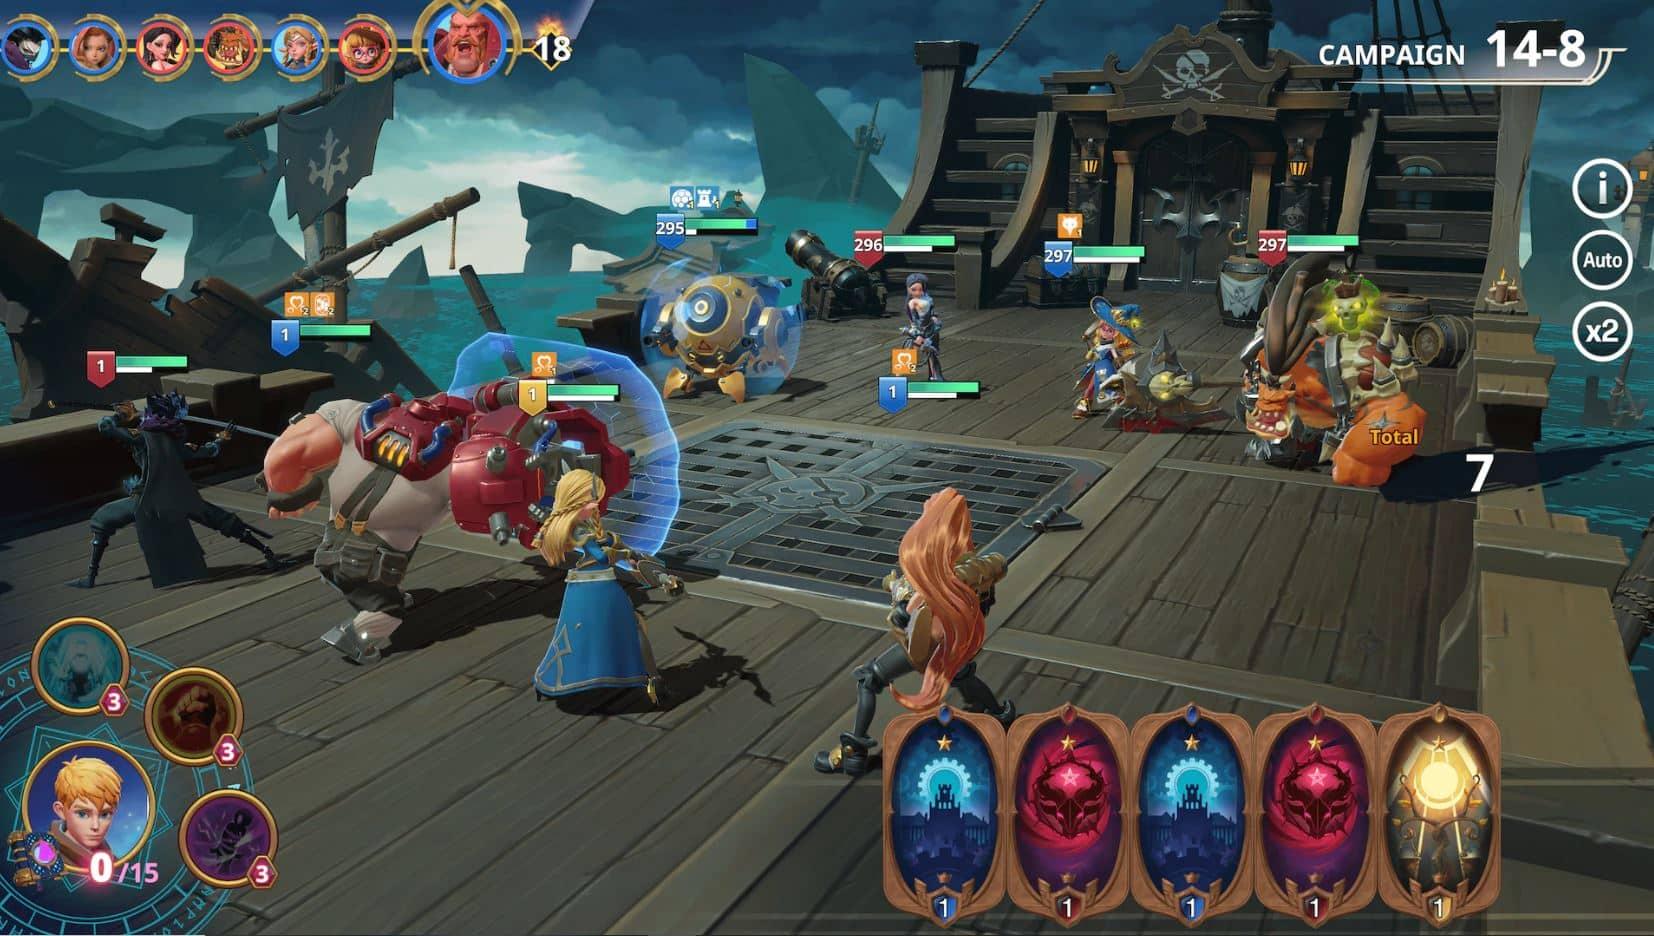 Developed by the Gala Games, Champions Arena is a new turn-based RPG-like game with over 100 collectible NFT champions and items.